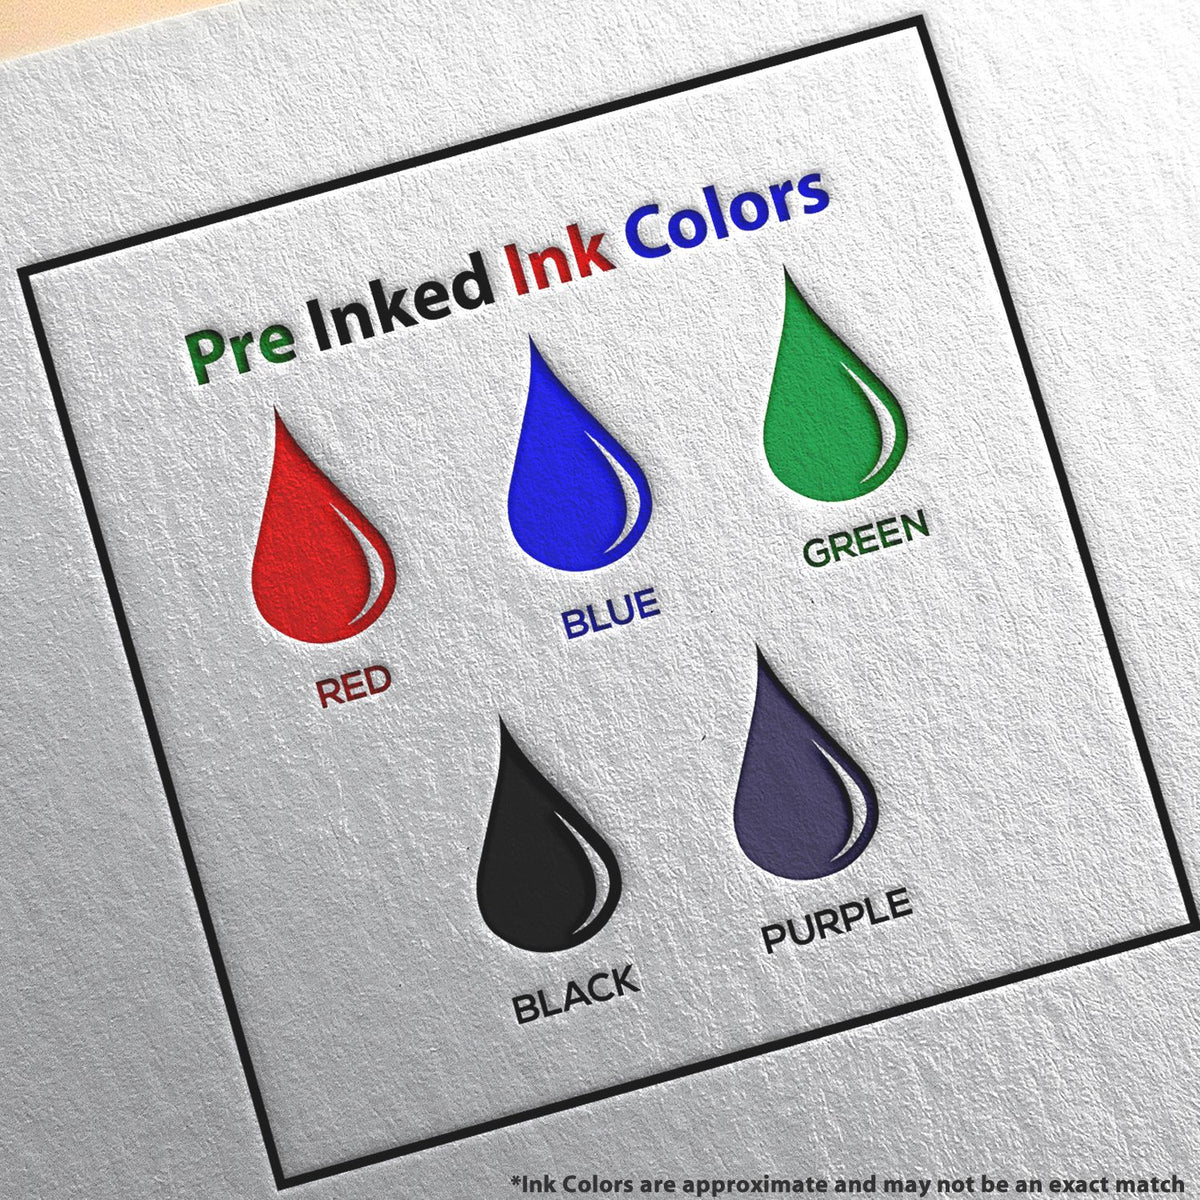 A picture showing the different ink colors or hues available for the Slim Pre-Inked Florida Architect Seal Stamp product.